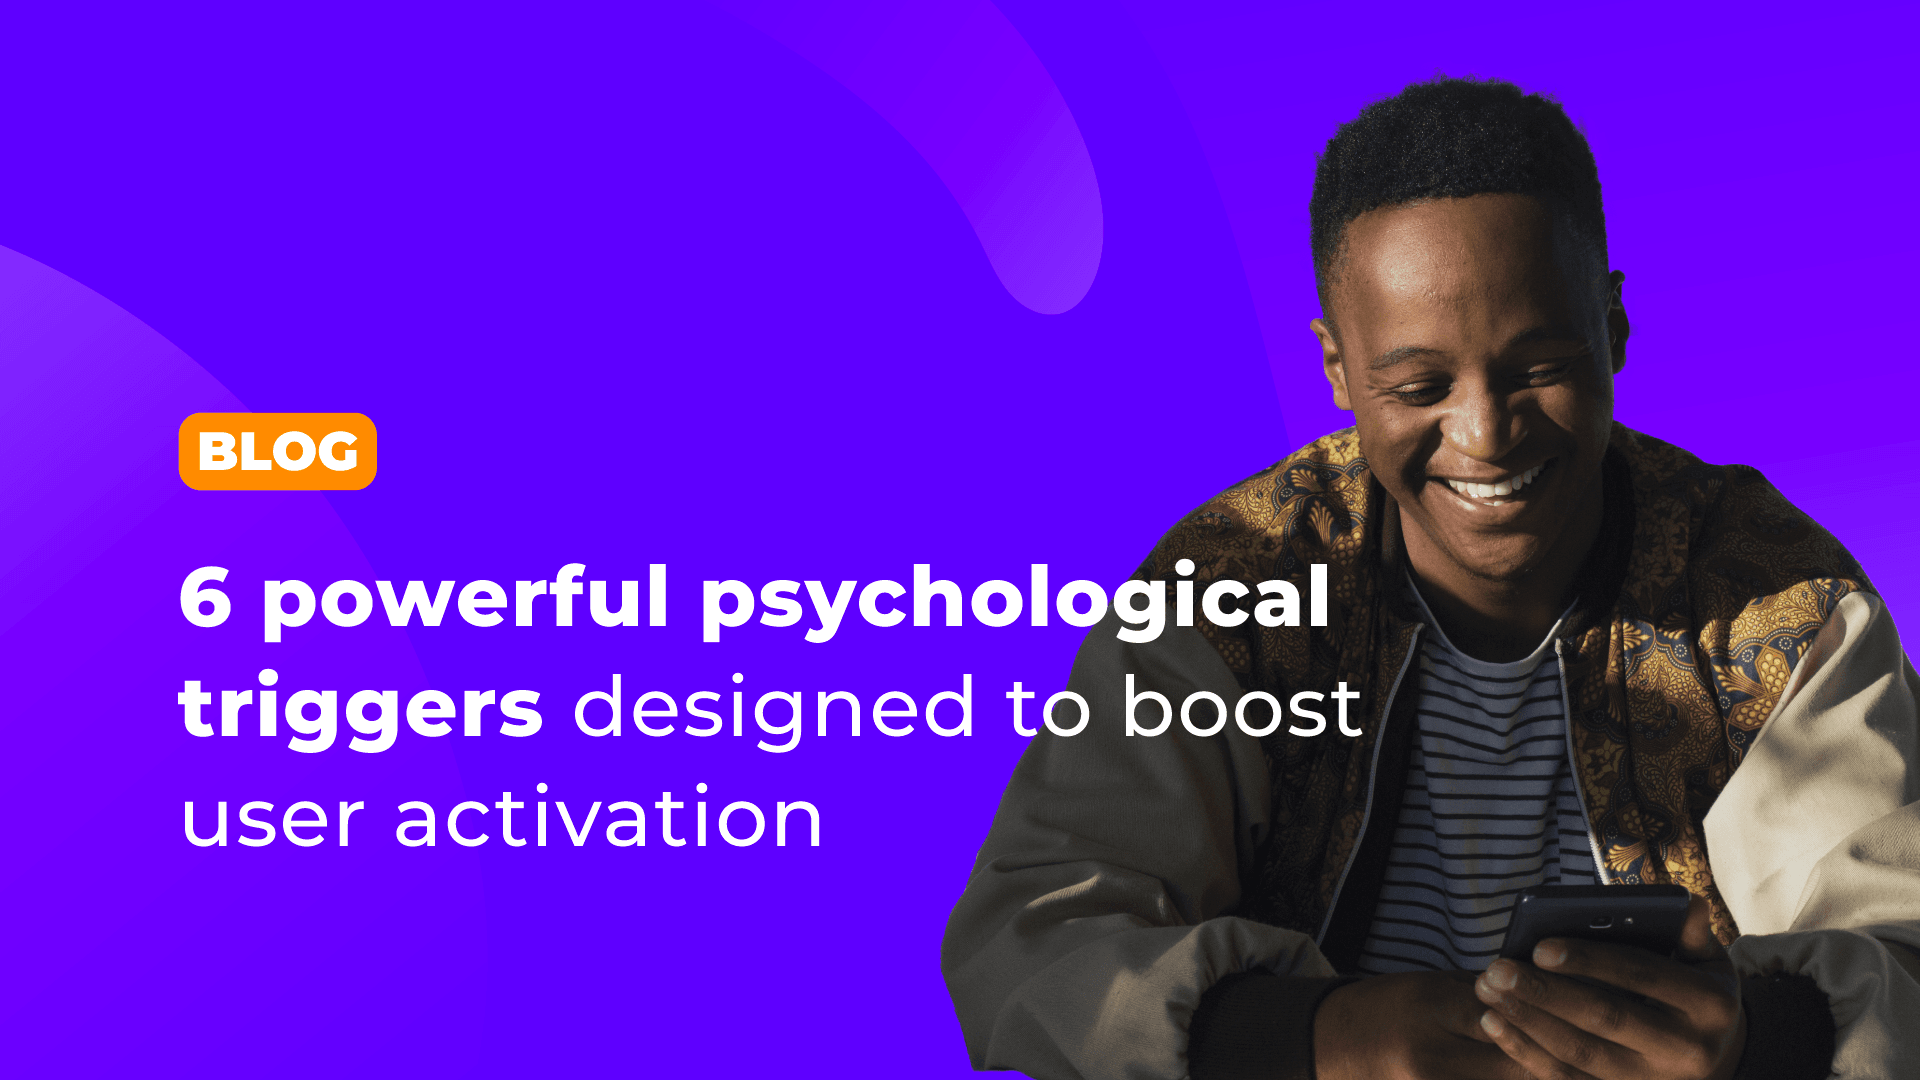 6 powerful psychological triggers designed to boost user activation